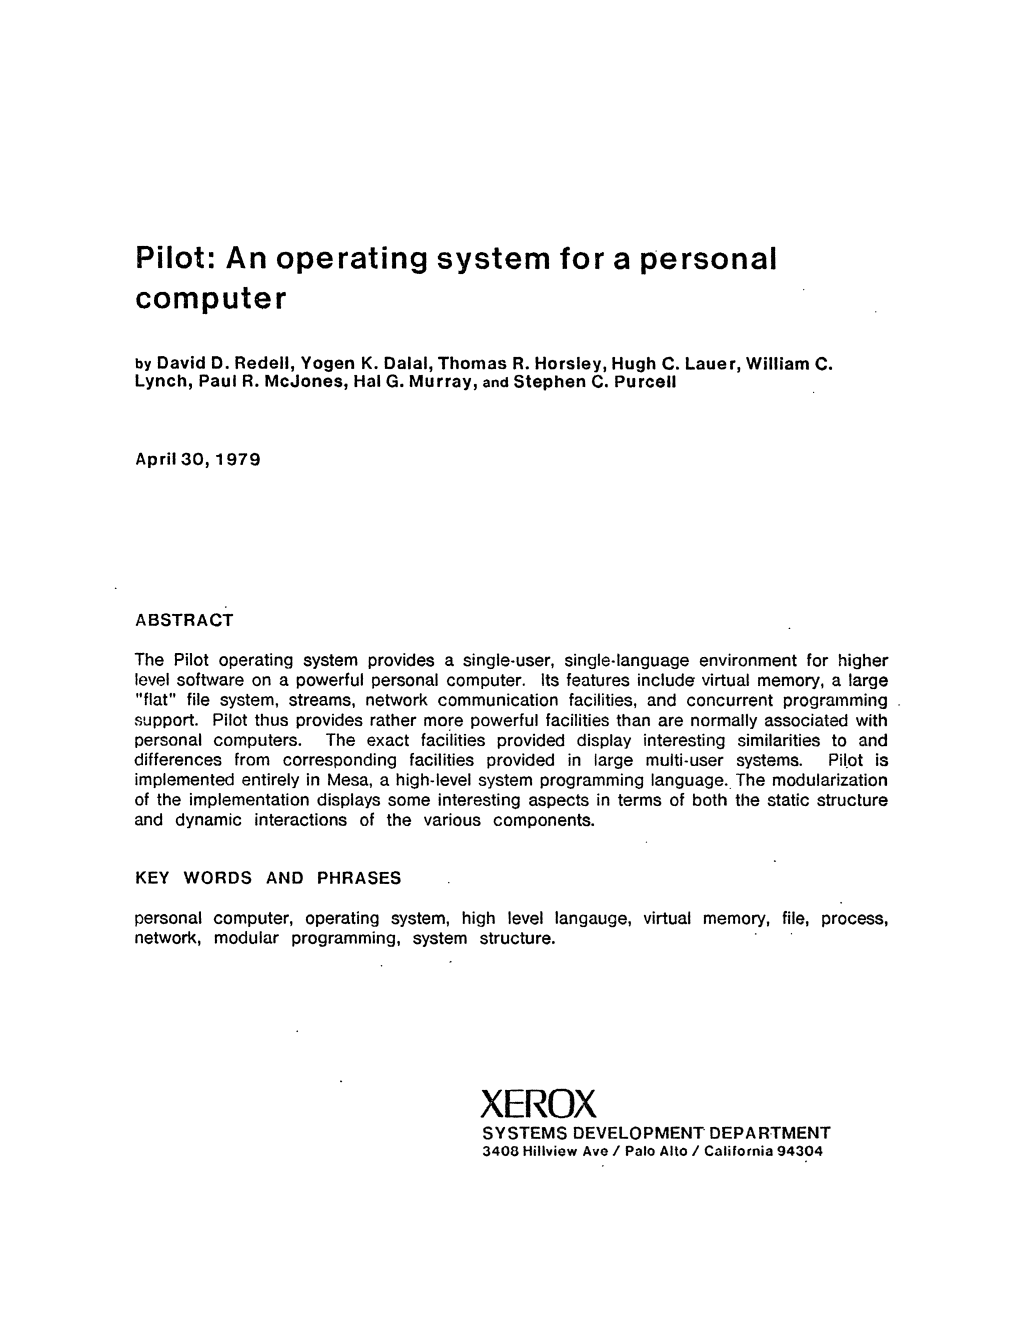 Pilot: an Operating System for a Personal Computer by David D